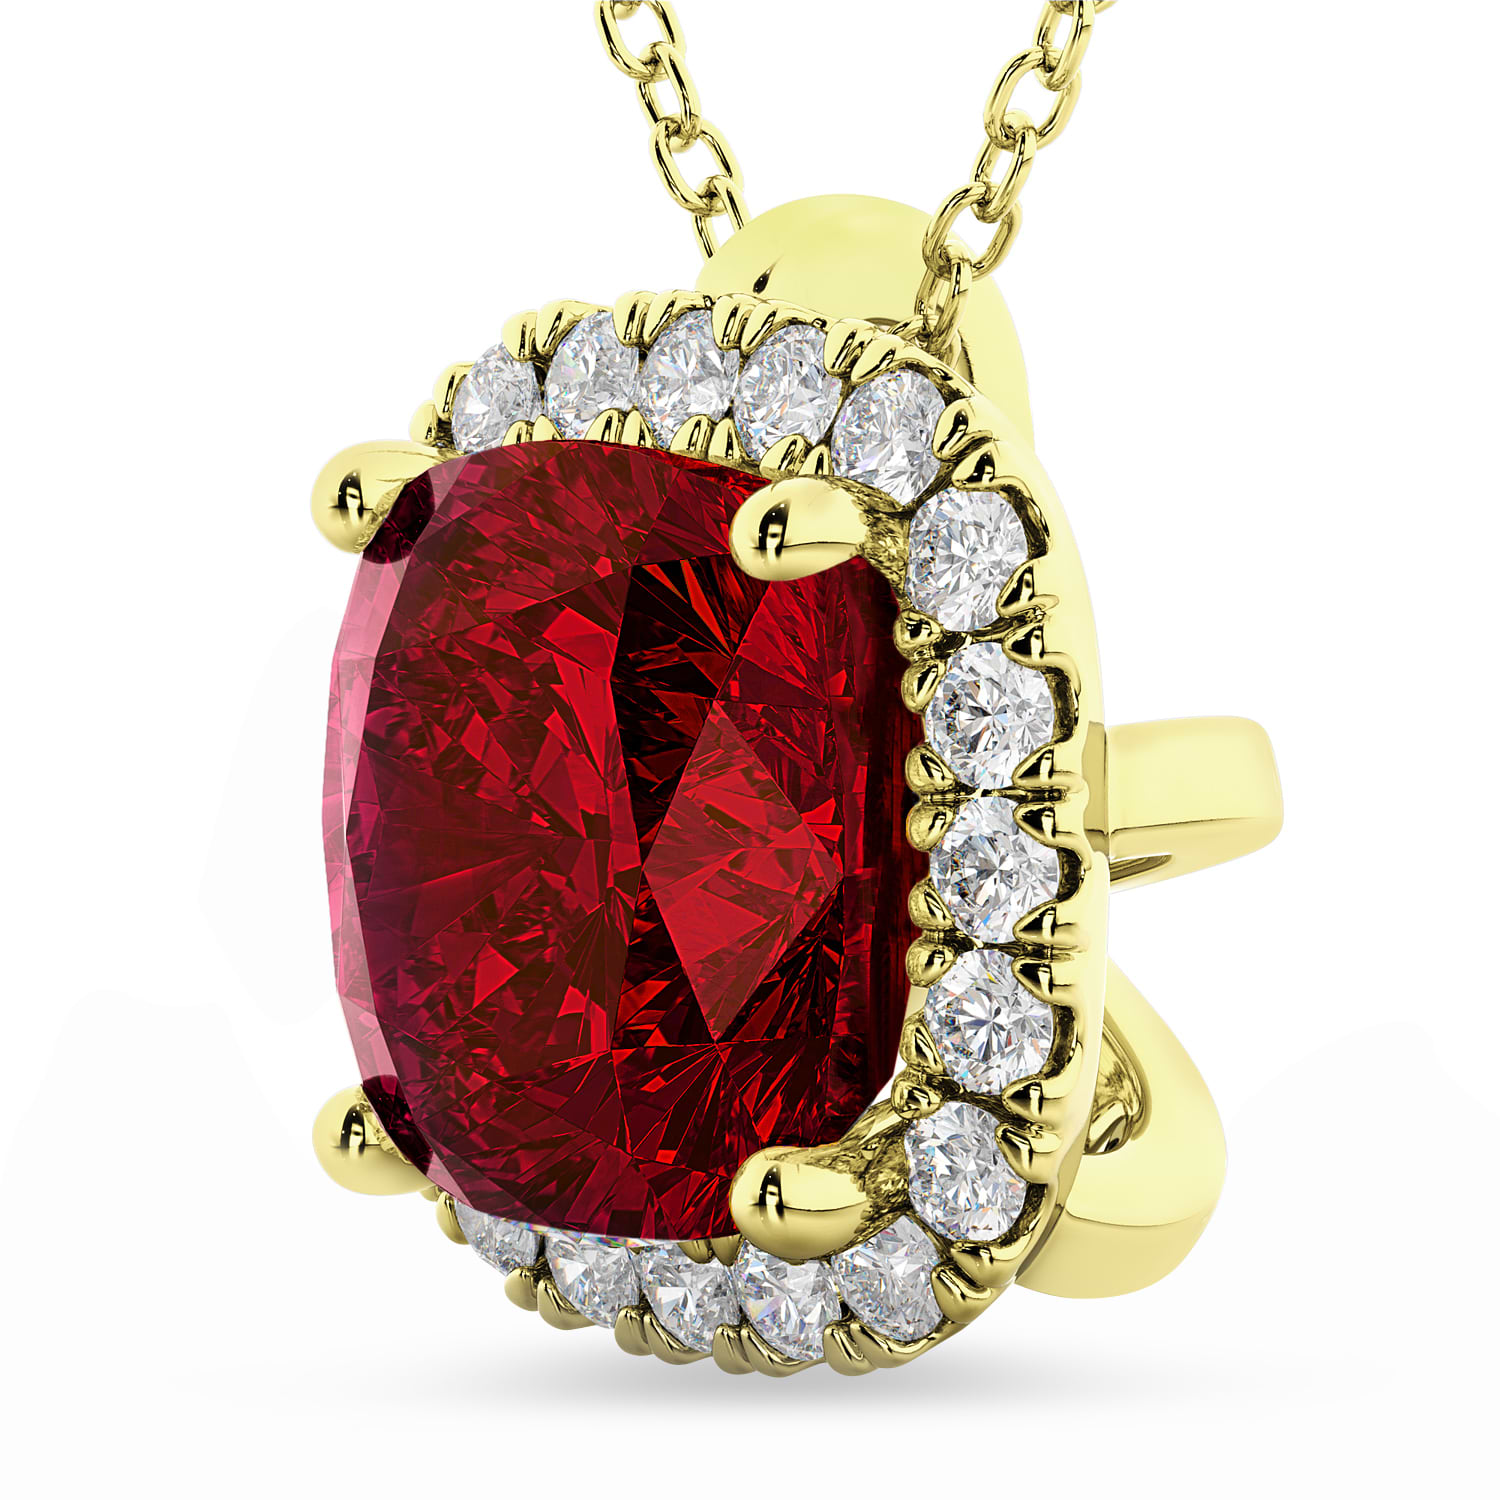 Halo Lab Ruby Cushion Cut Pendant Necklace 14k Yellow Gold (2.02ct)